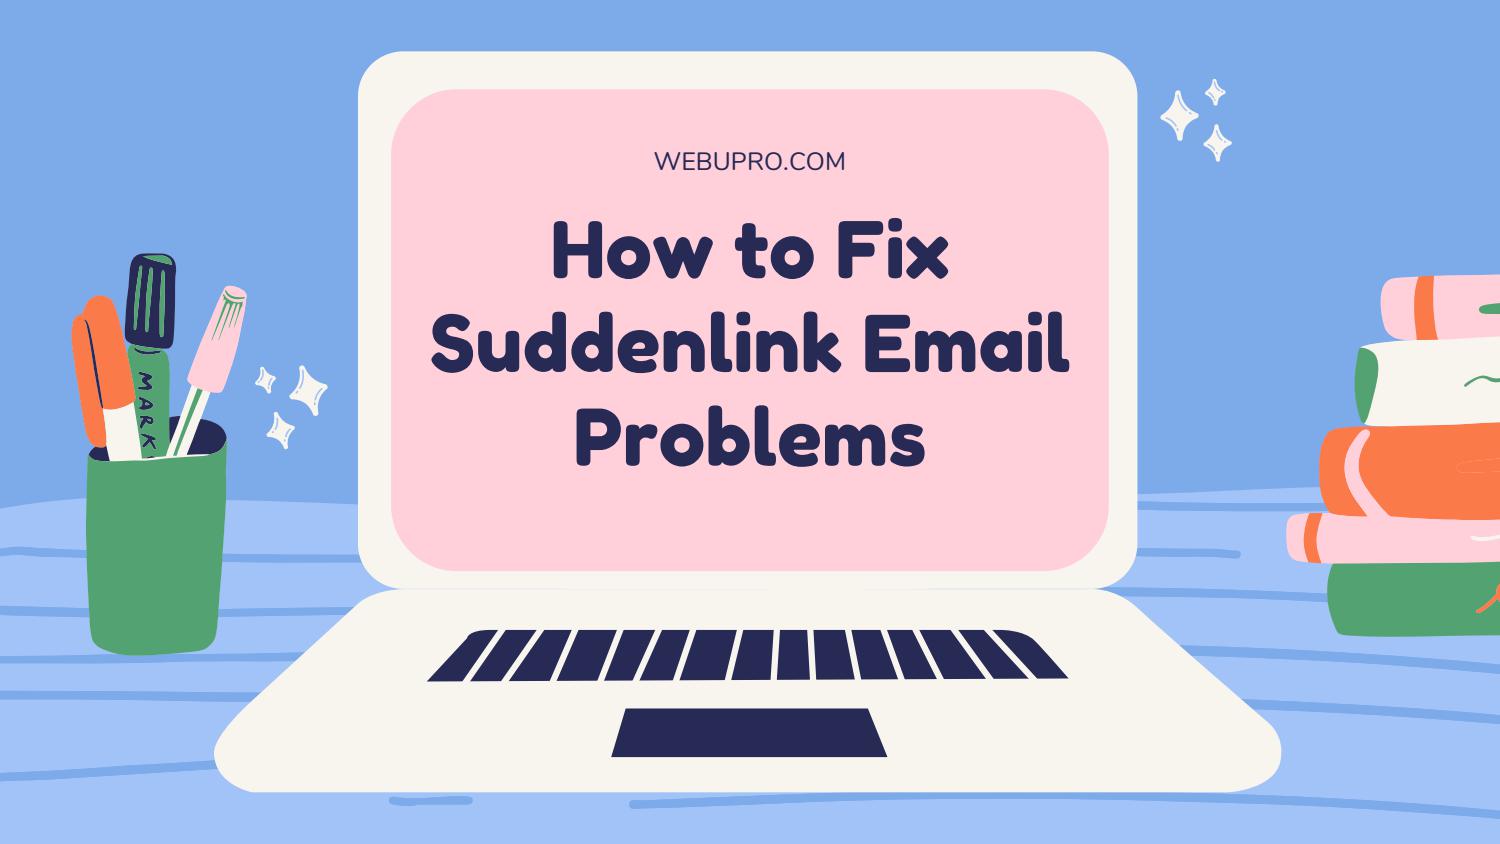 How to Fix Suddenlink Email Problems?